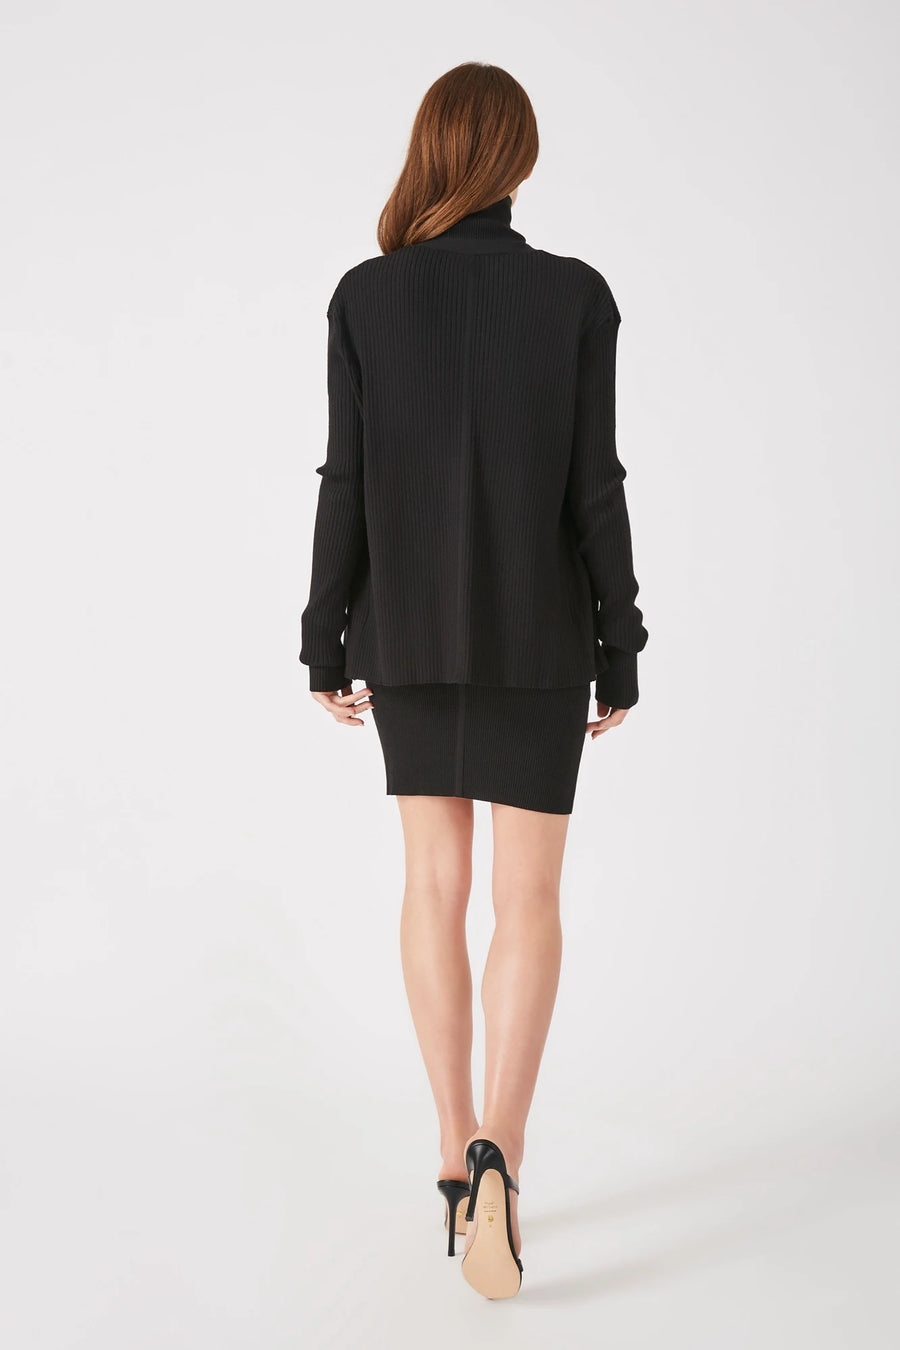 The Grant open cardigan in black by Greyven